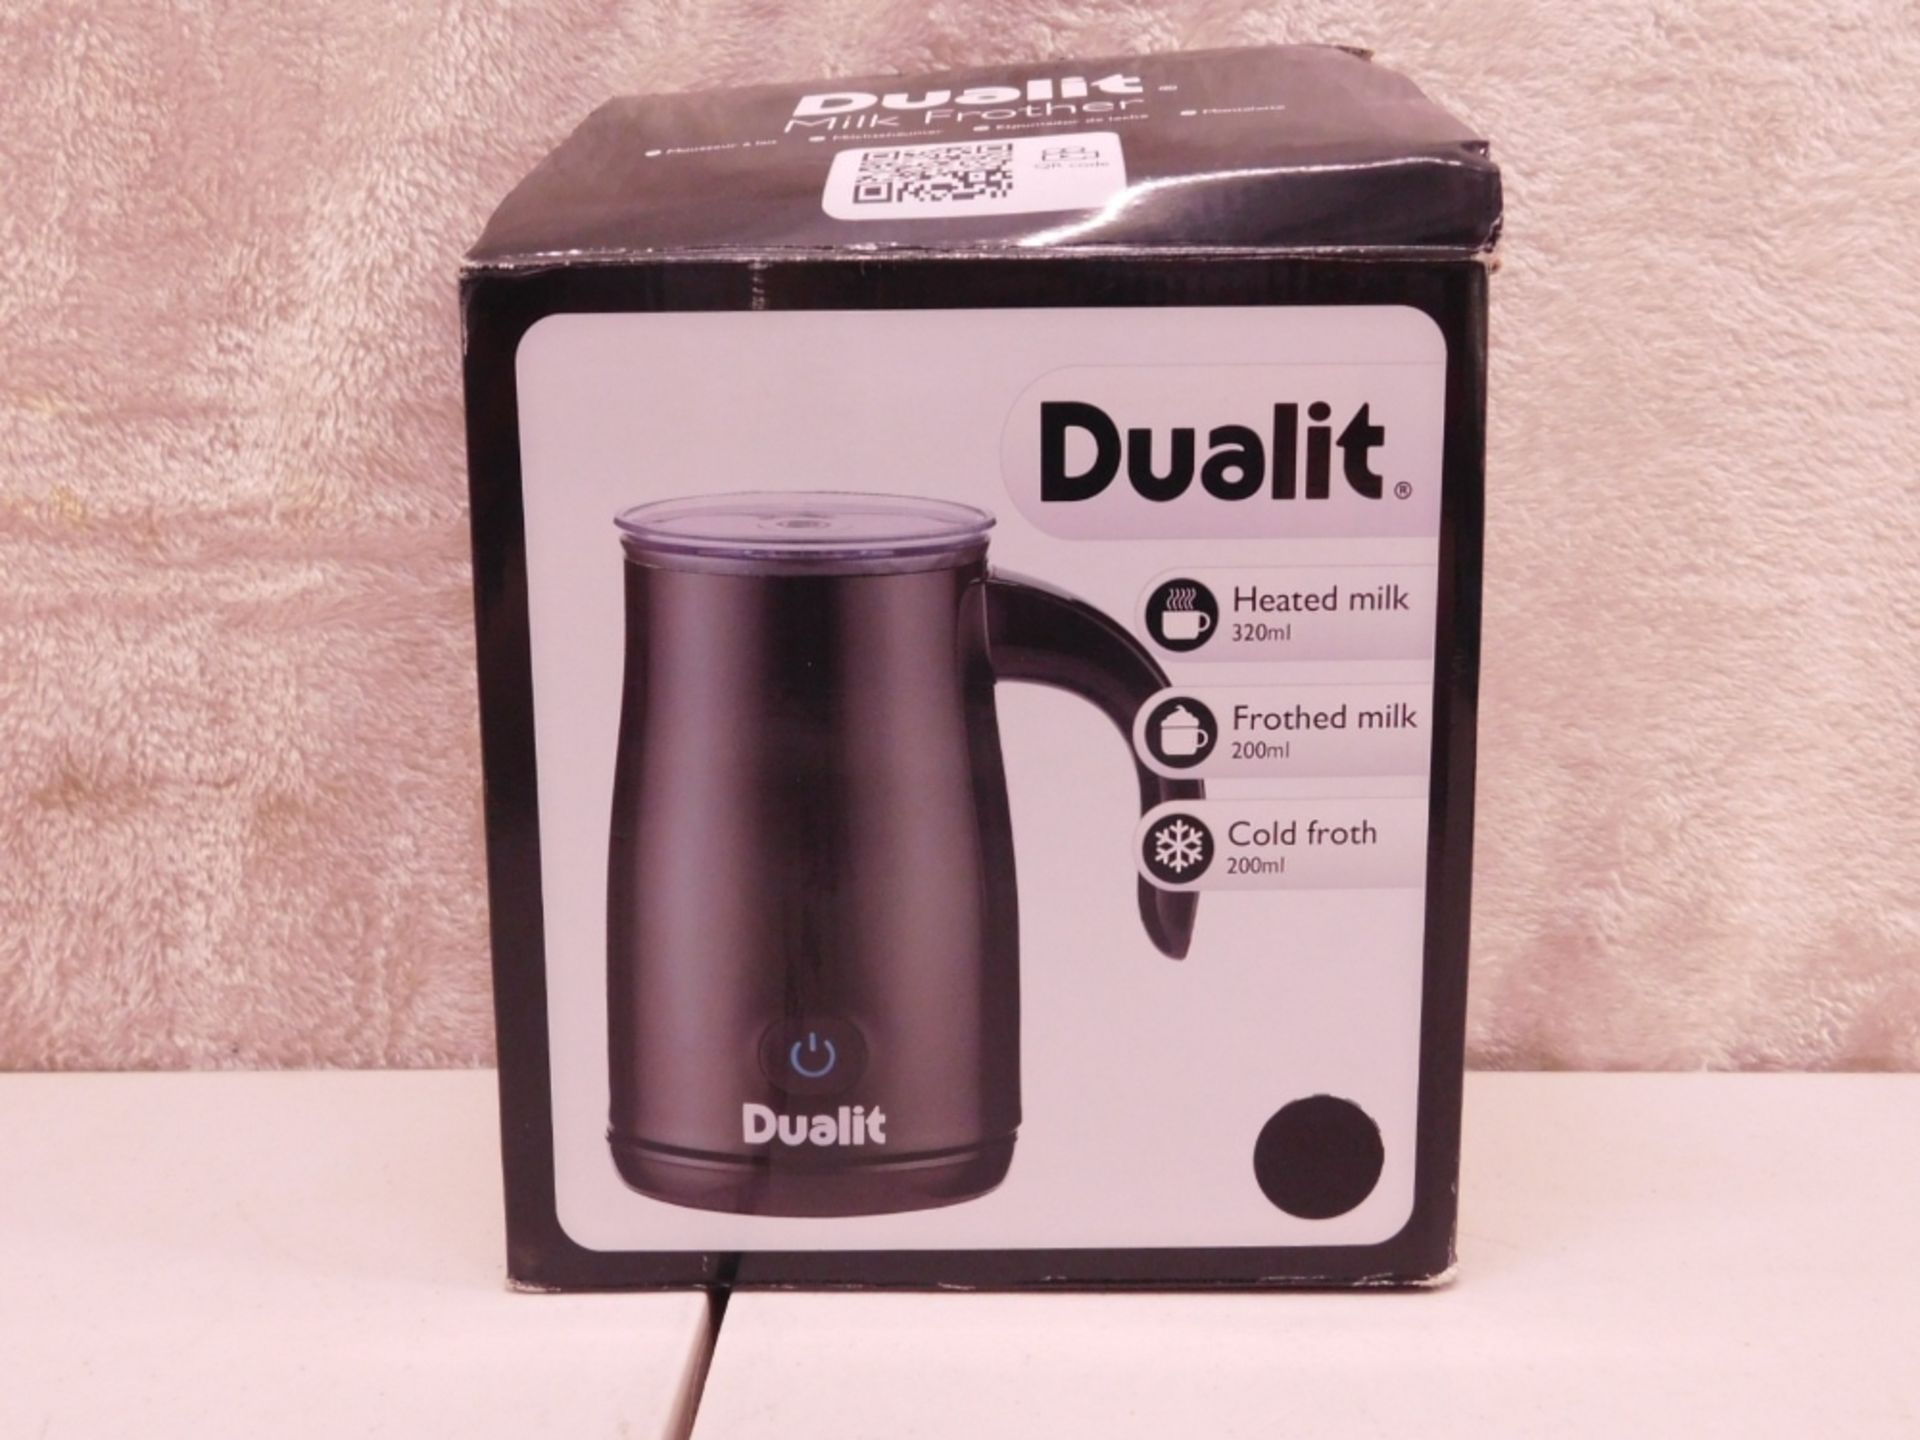 1 BOXED DUALIT LATTECCINO MILK FROTHER RRP £44.99